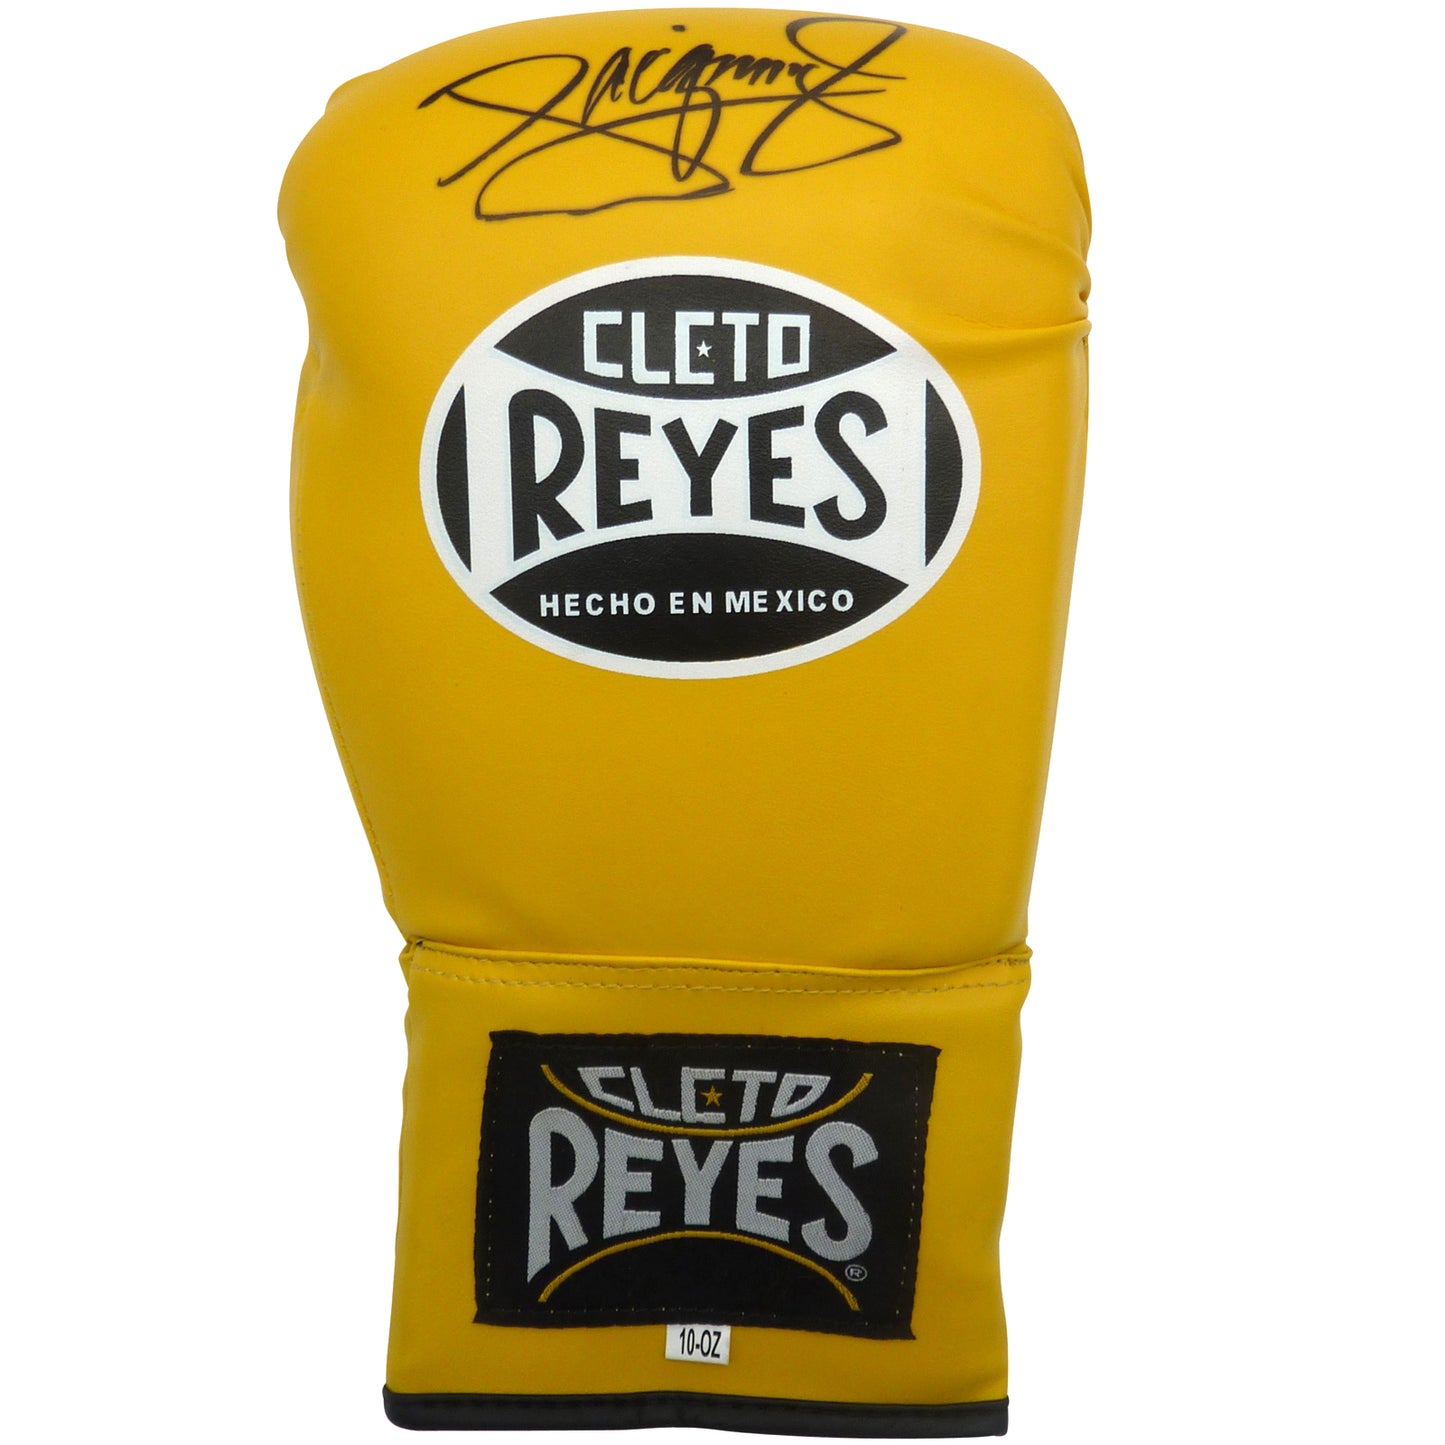 Manny Pacquiao Autographed (Yellow) Boxing Glove - PSADNA